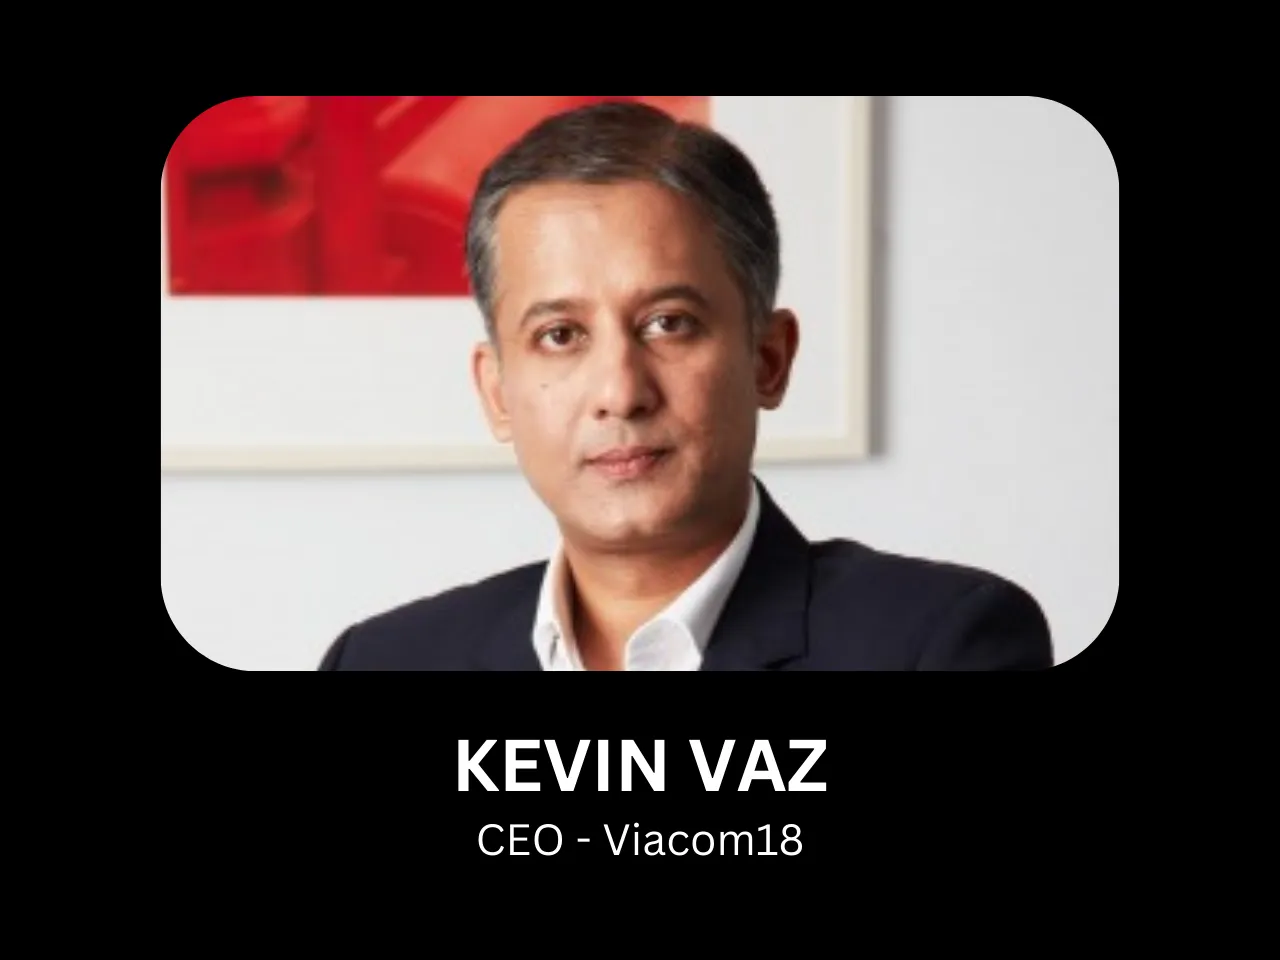 FICCI appoints Kevin Vaz as the Chairman of Media & Entertainment Committee